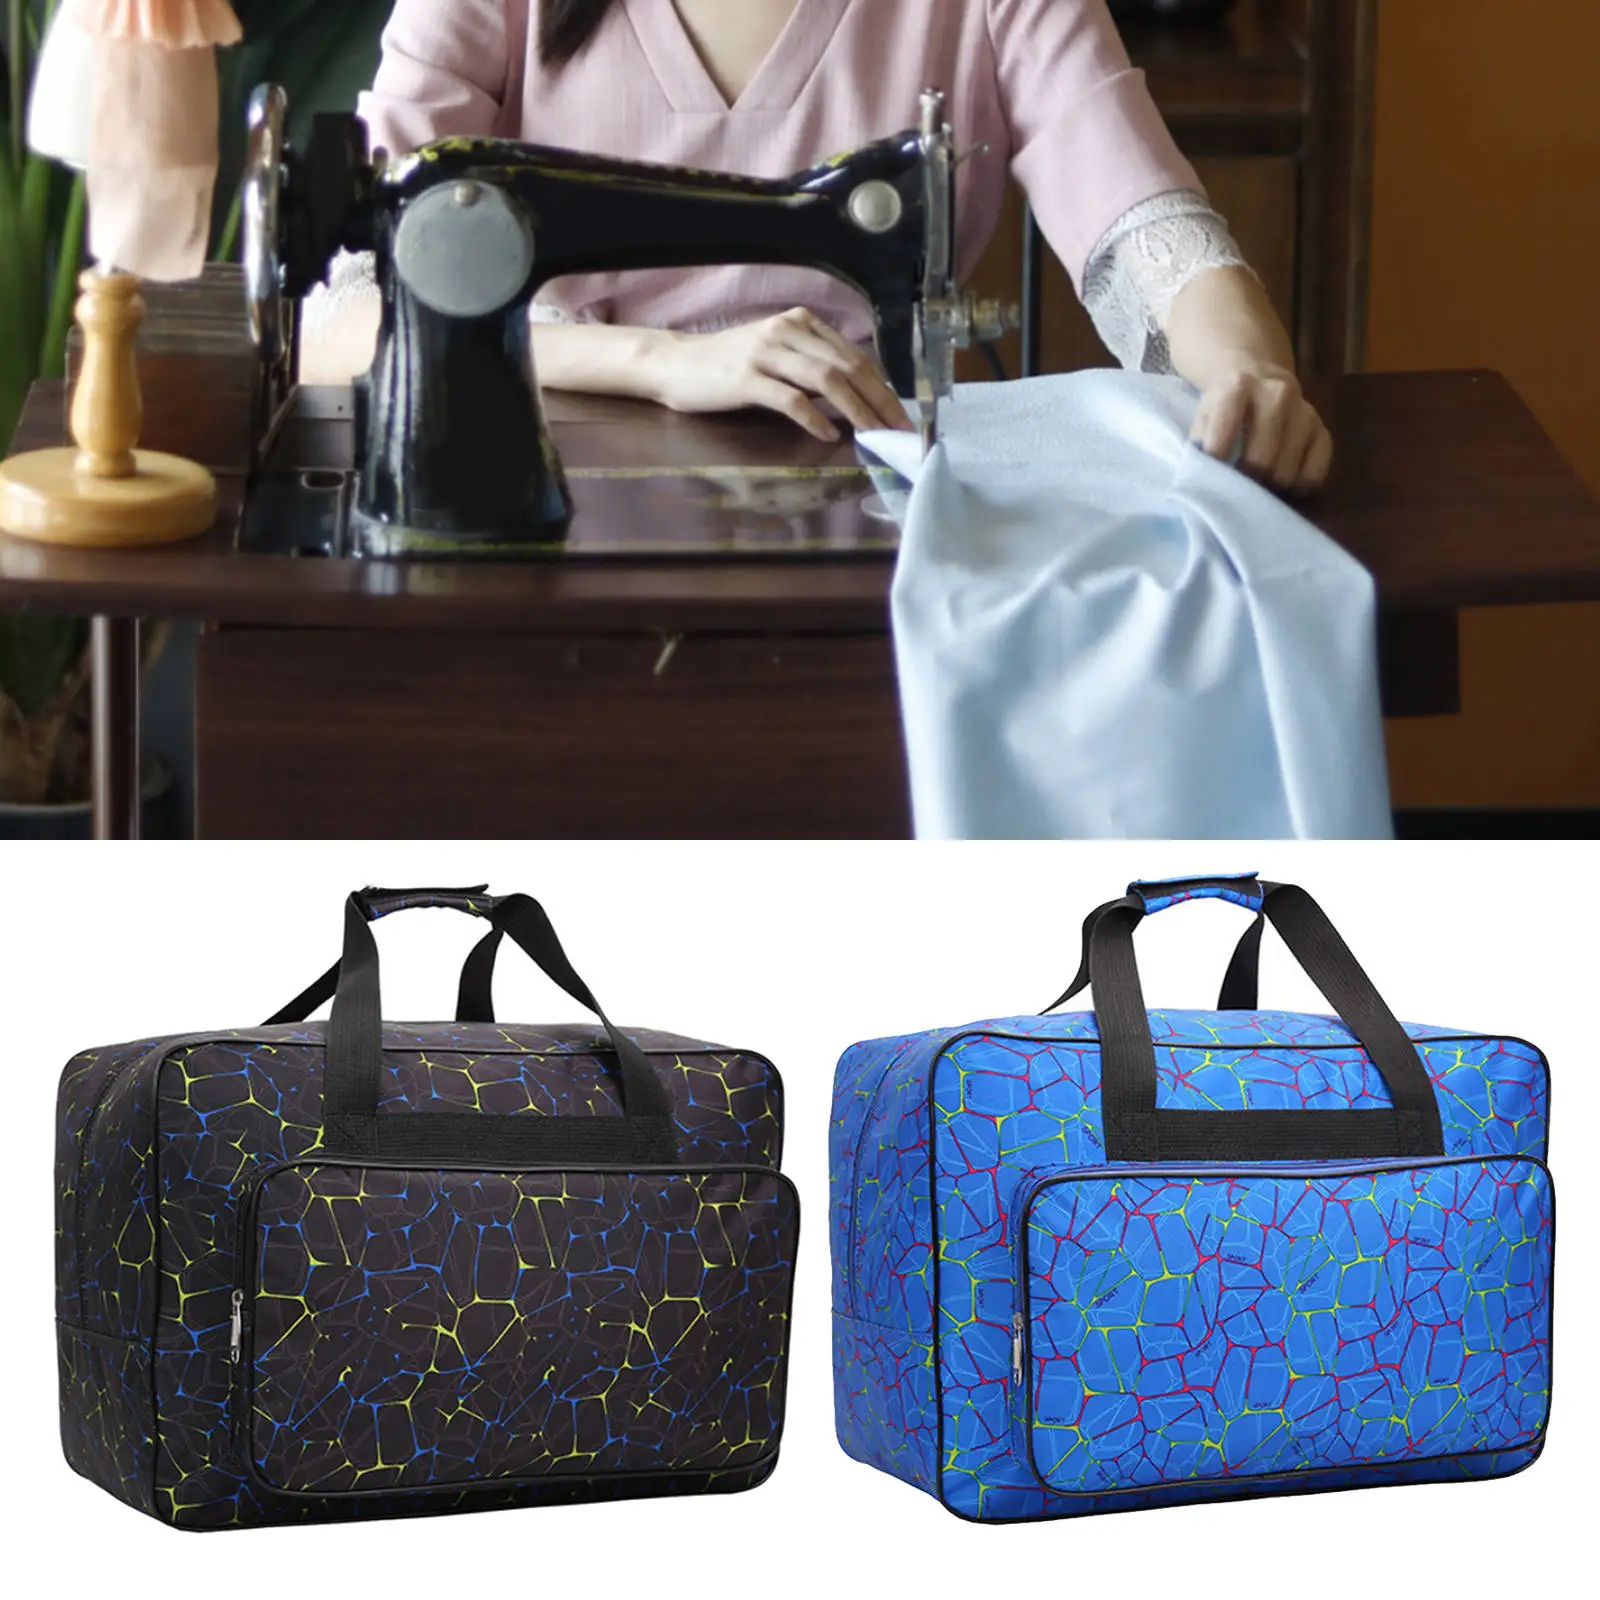 Travel Sewing Machine Carry Bag 46x23x32cm Handbag Dustcover Tote Pocket Pack Hand Bags